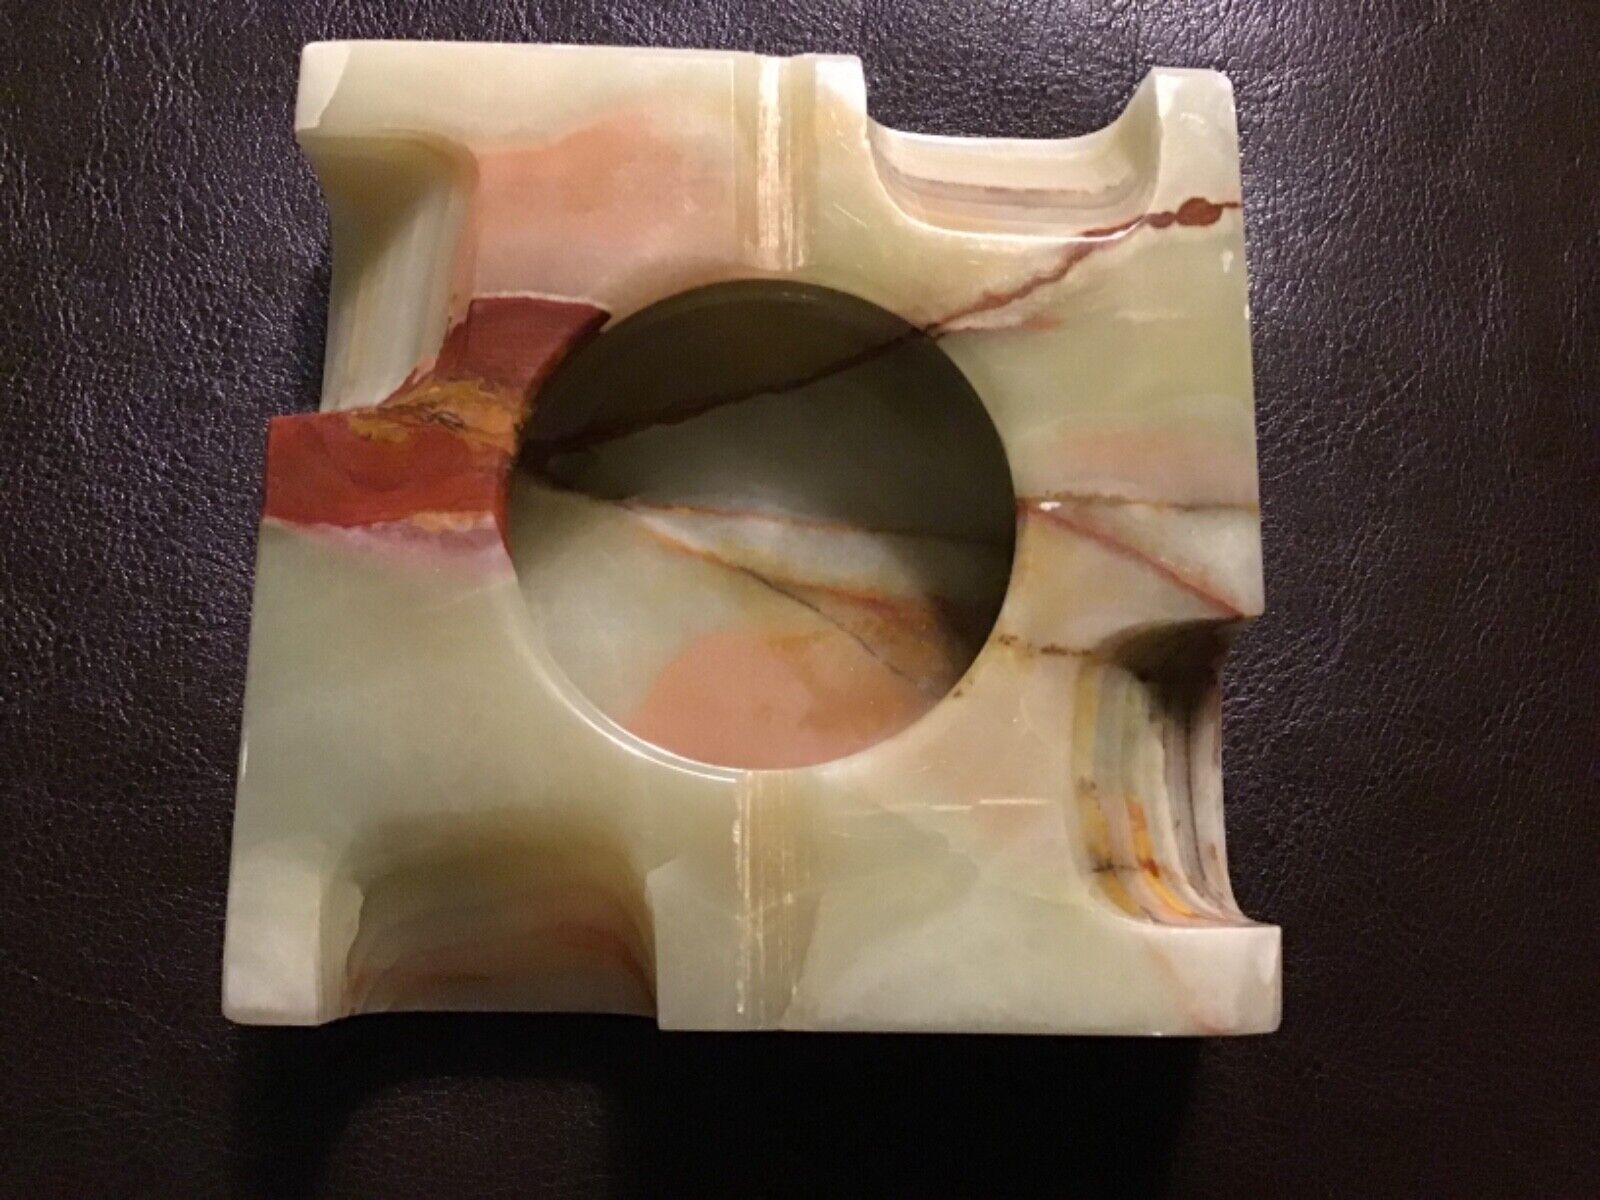 Vintage Carved Onyx Ashtray, Natural Carved Stone, Approx 4” Square, $7 ship 